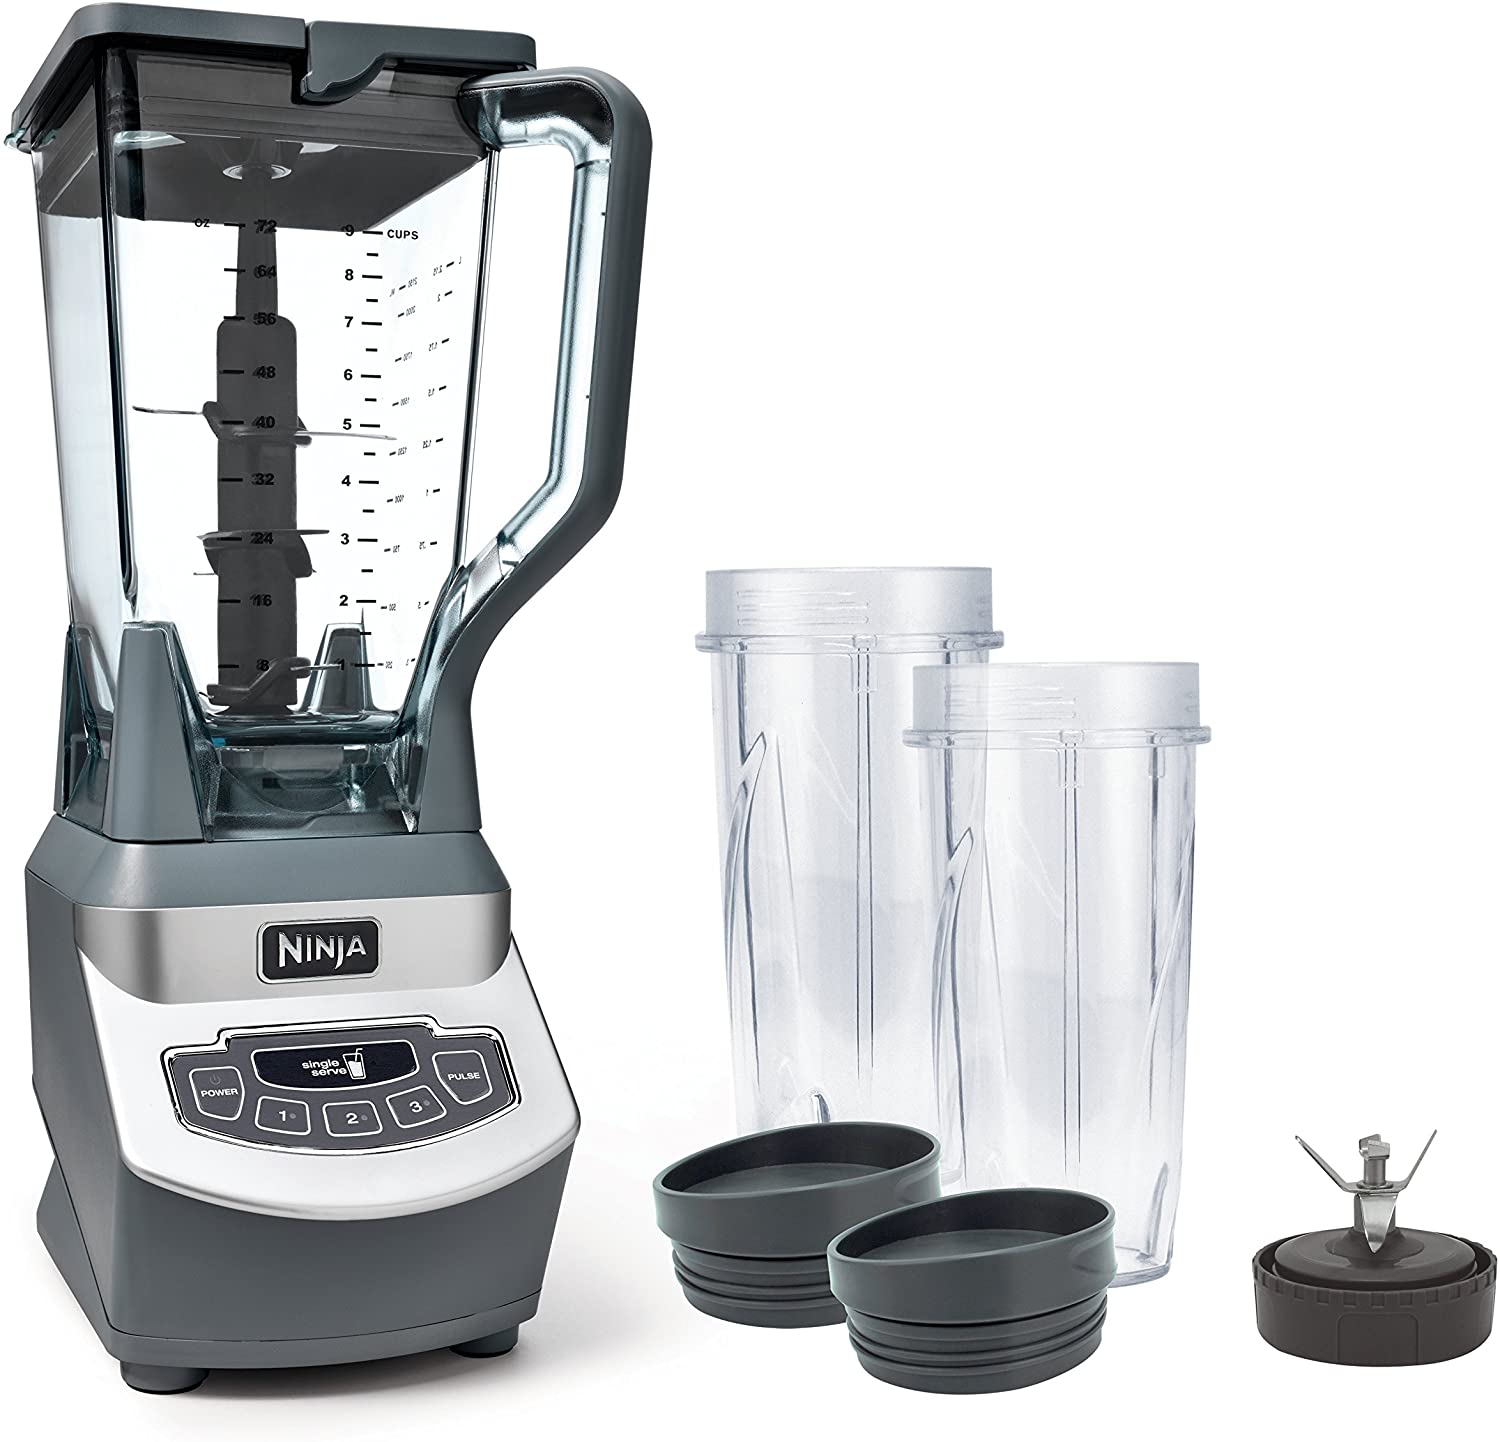 How To Make A Bread Dough With Ninja Blender?